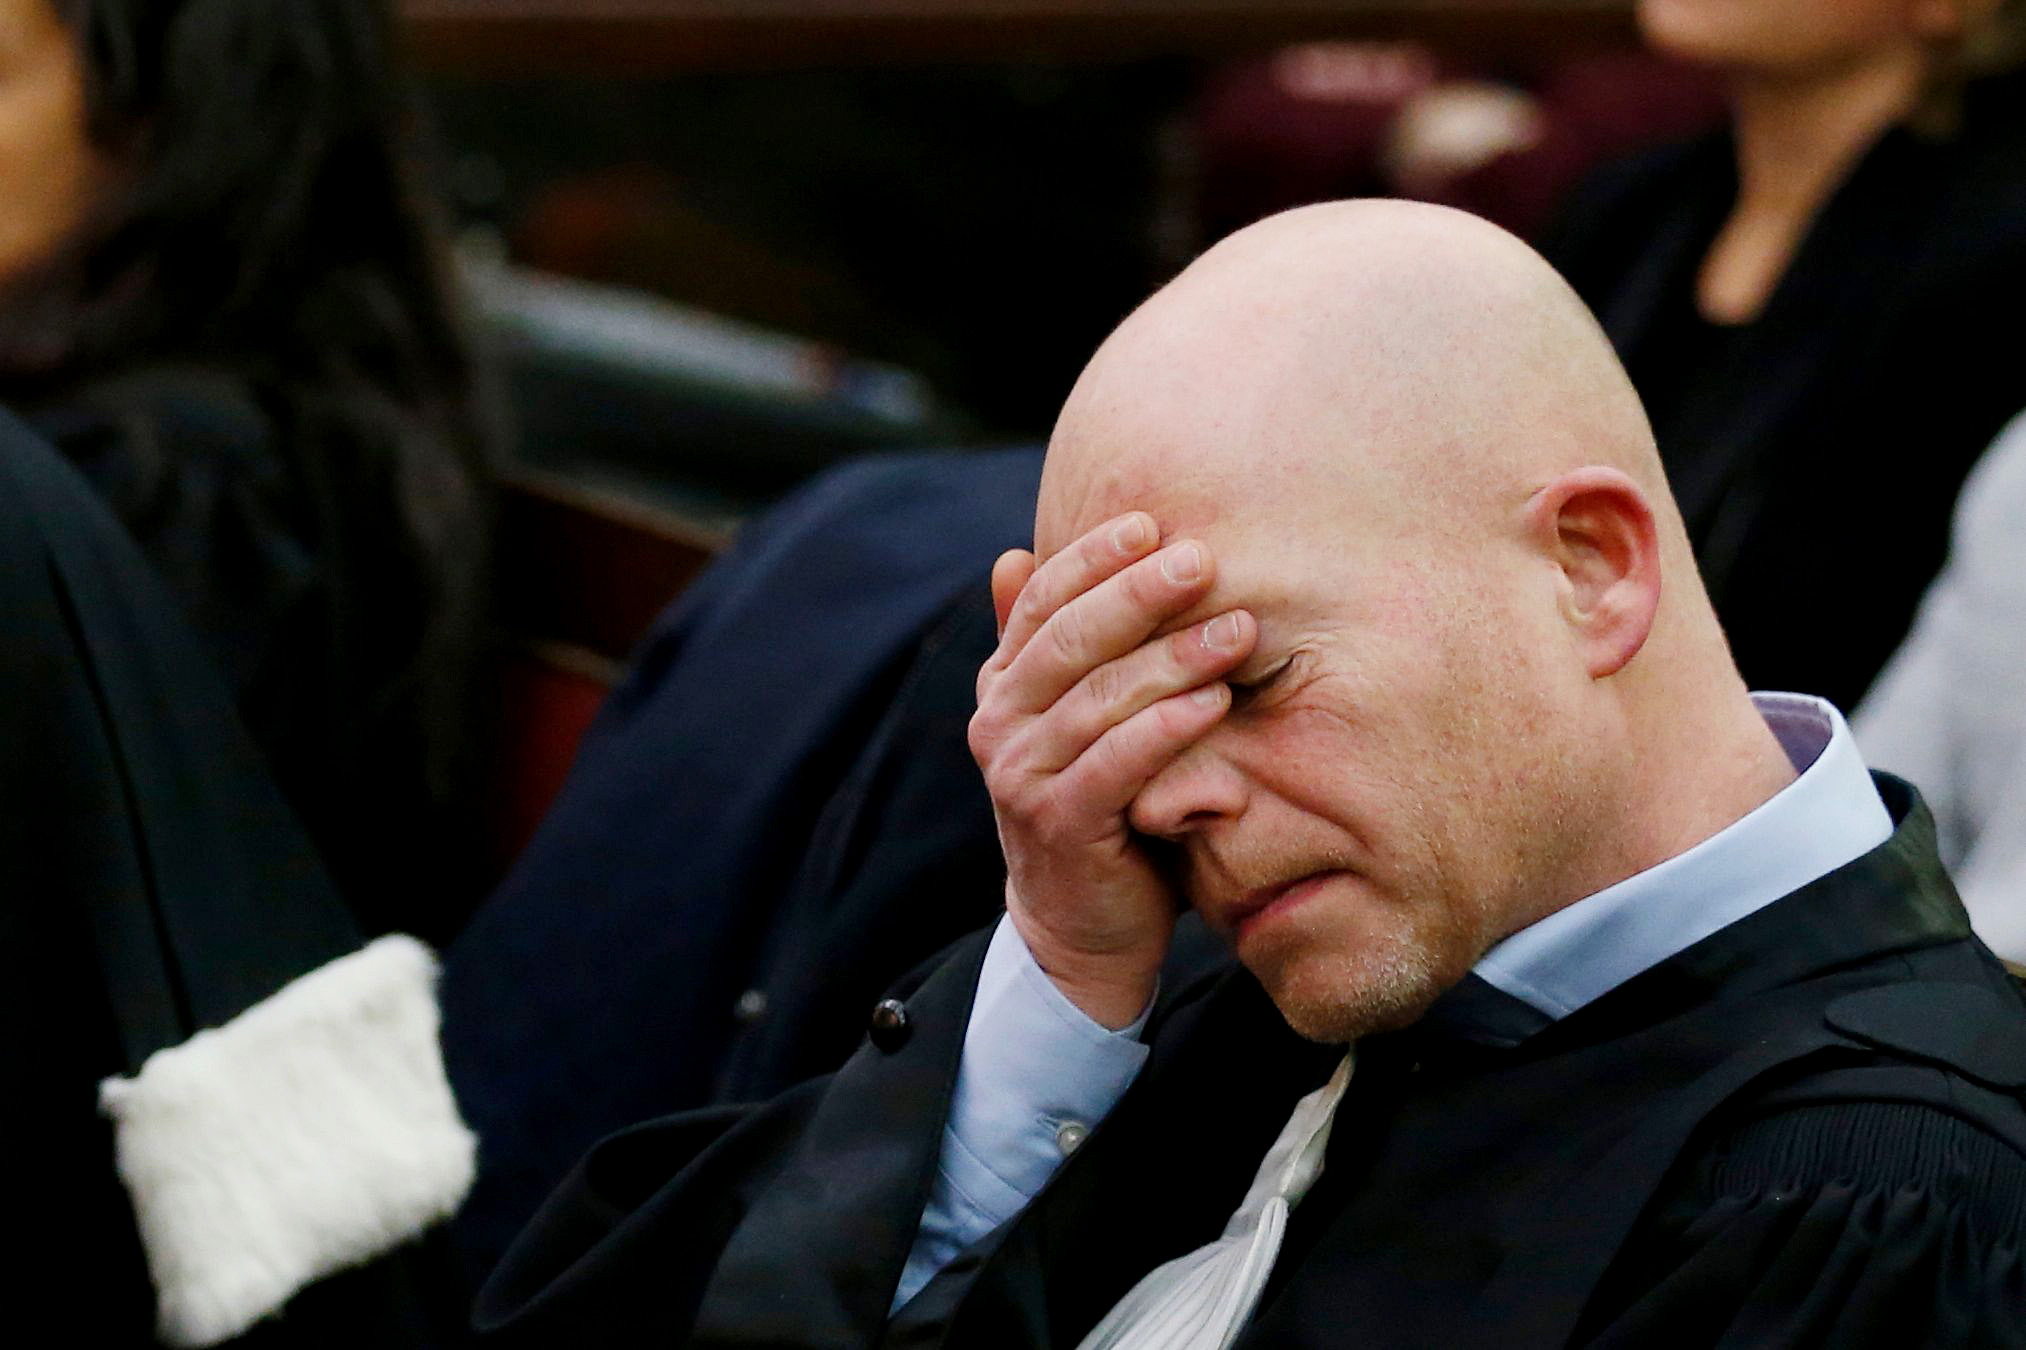 Belgian lawyer representing Paris attacks suspect Salah Abdeslam Sven Mary, reacts during the second day of the trial of prime suspect in the November 2015 Paris attacks Salah Abdeslam, at the "Palais de Justice" courthouse in Brussel, Feb. 8, 2018.